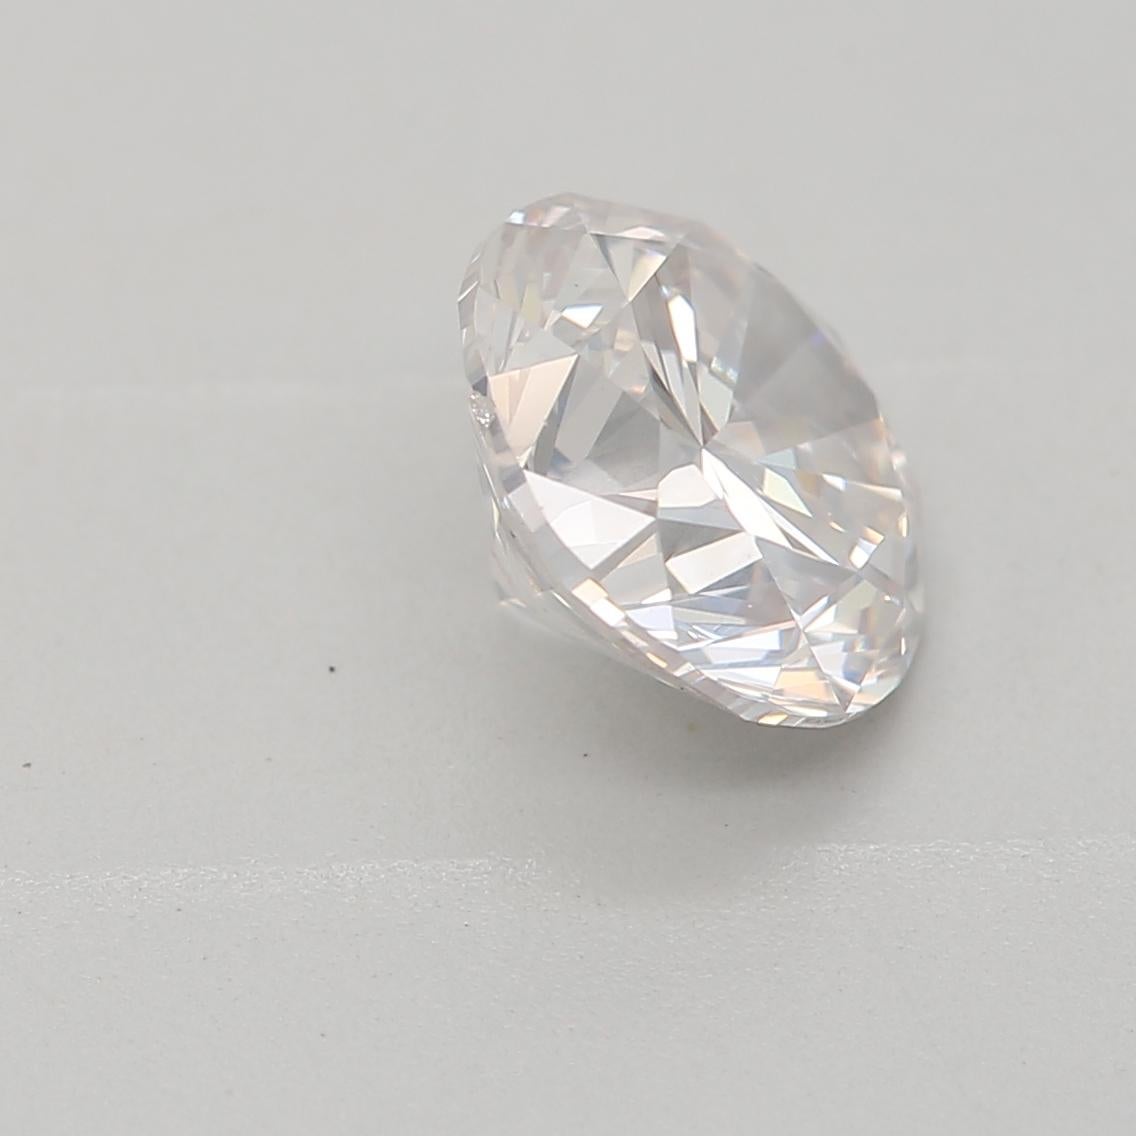 1.00 Carat Faint Pinkish Brown Round Cut Diamond SI2 Clarity GIA Certified For Sale 1